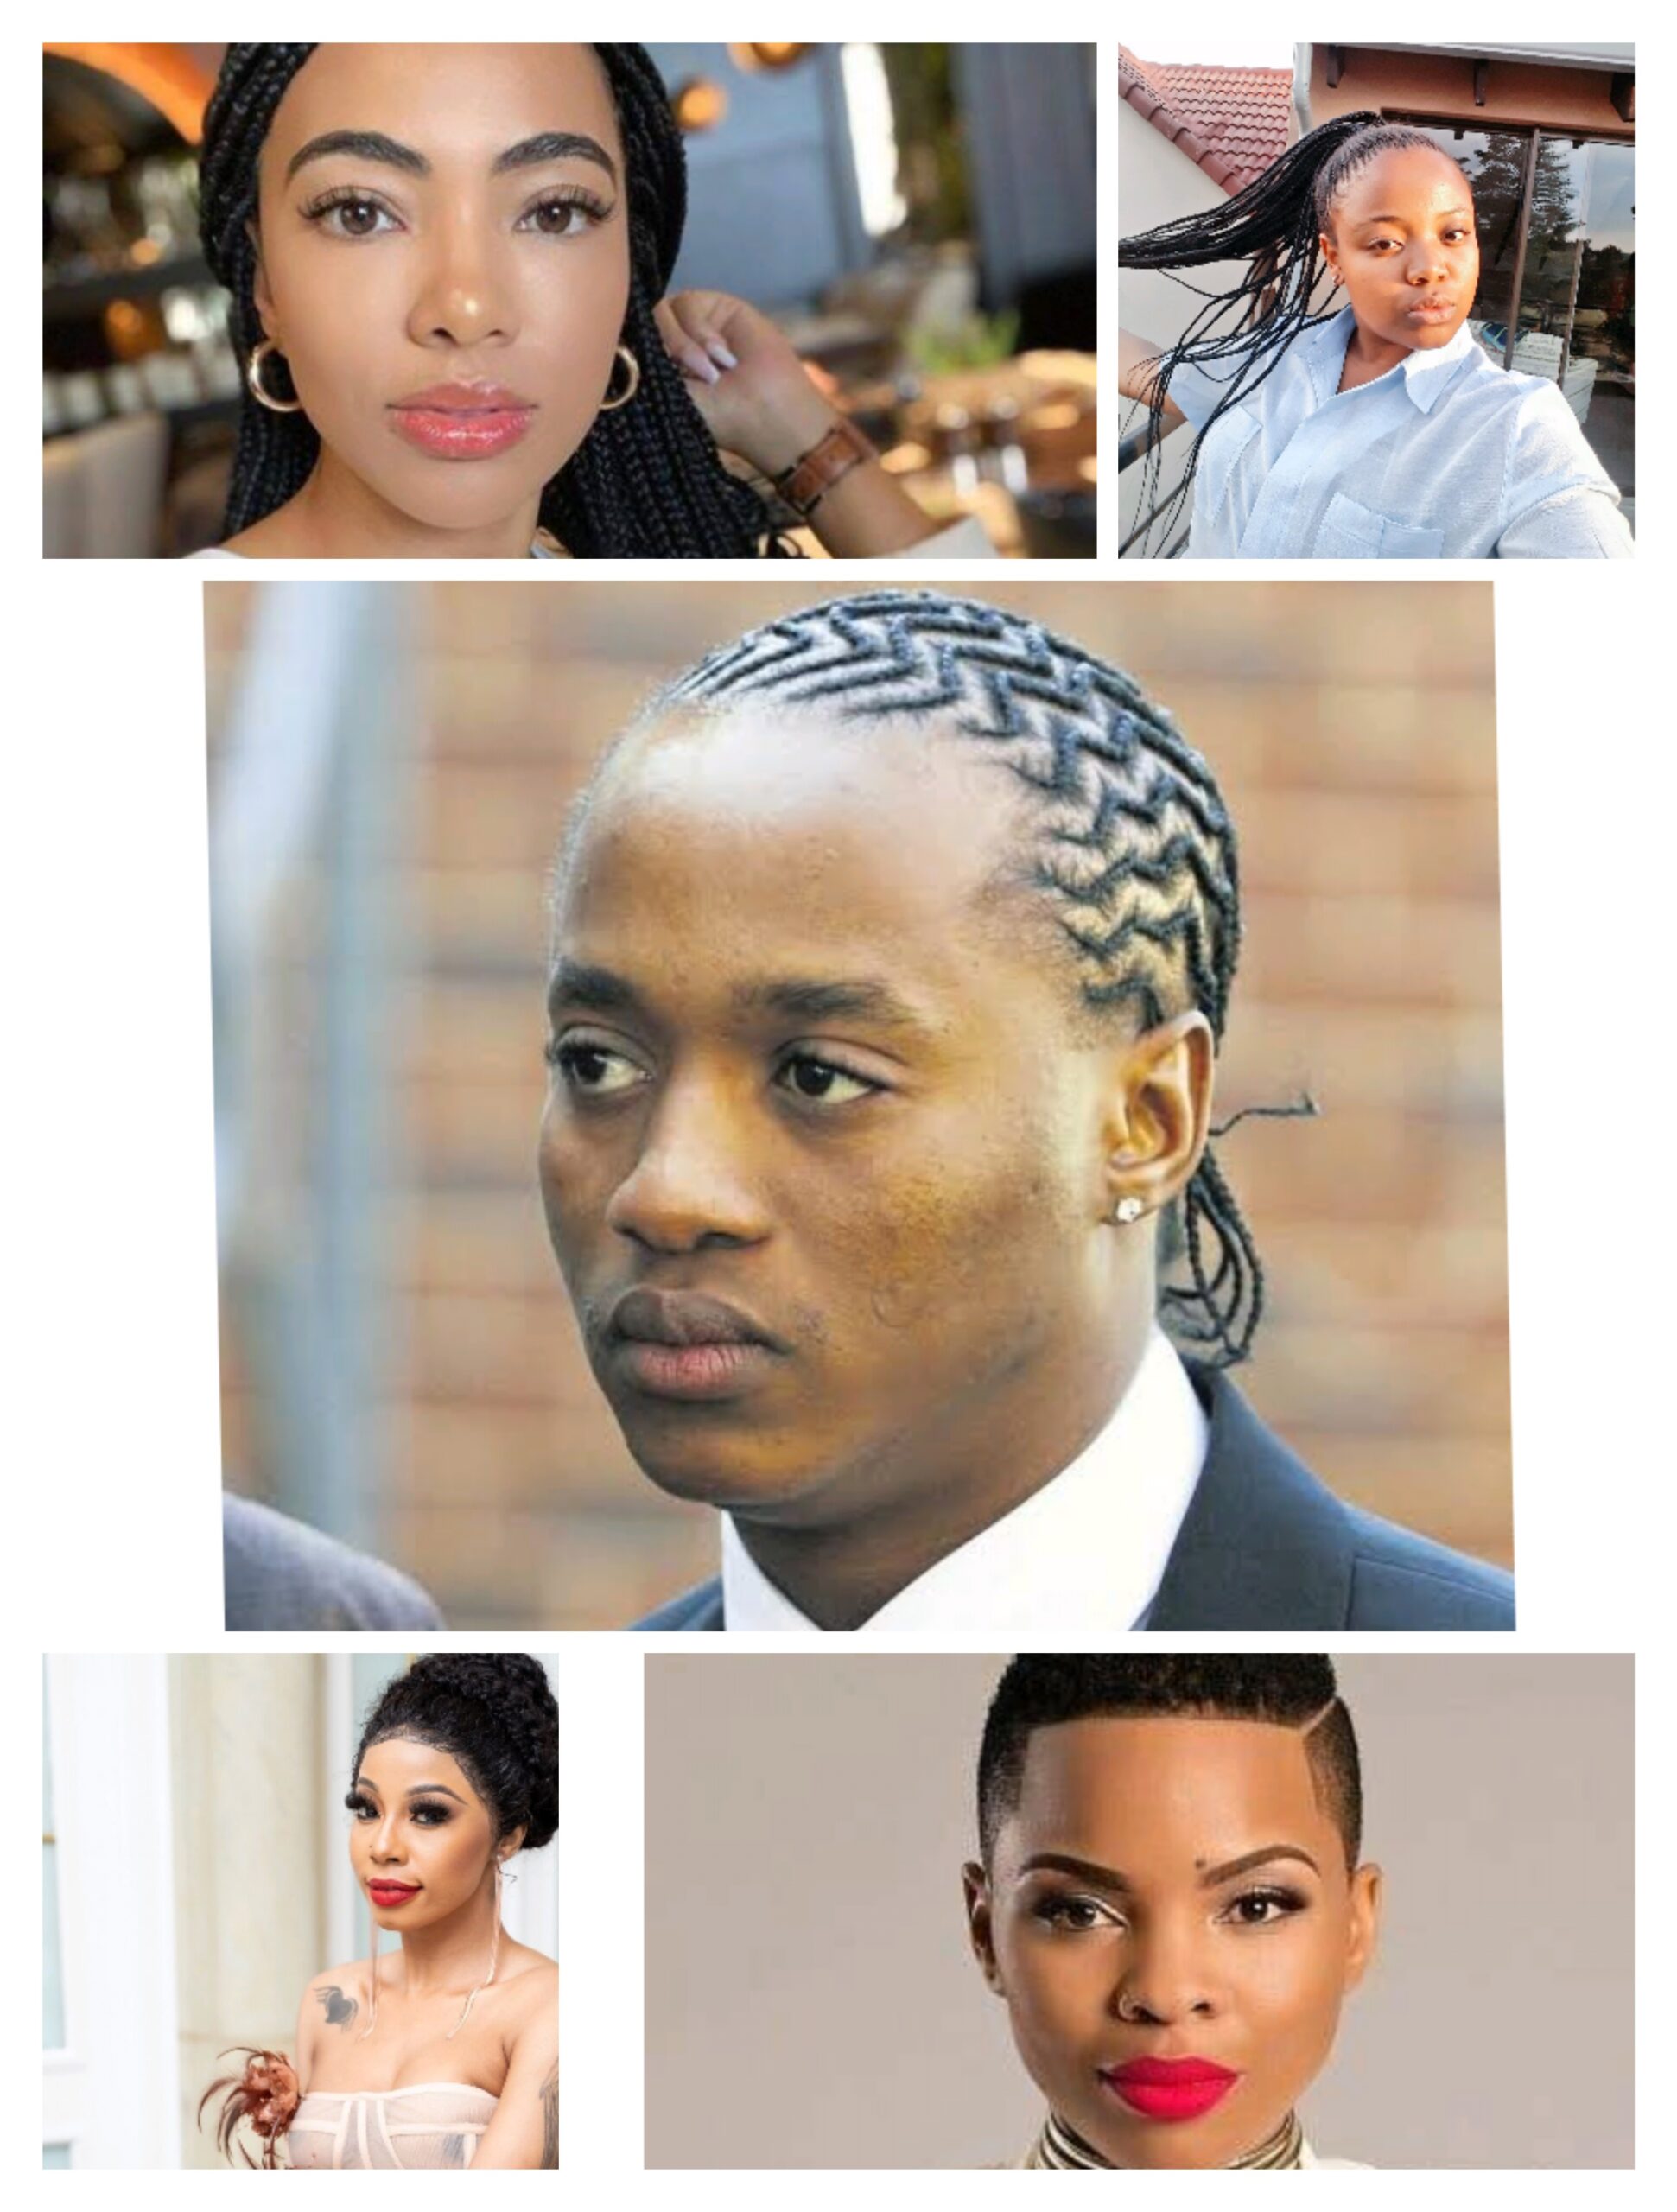 Check out 4 women who have testified against Jub Jub